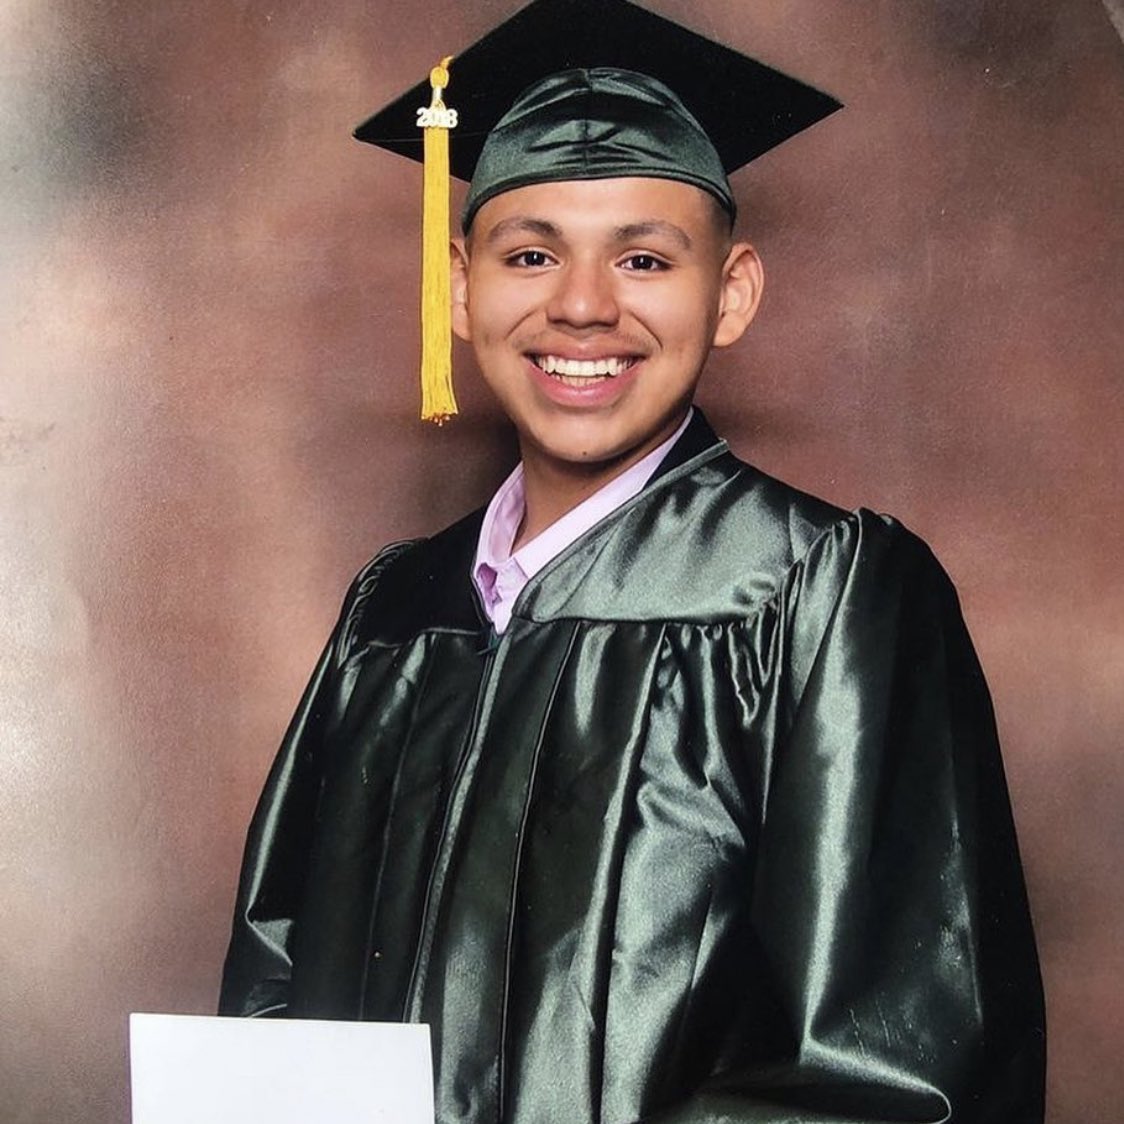 Andres Guardado 18 years old From El Salvador  June 18, 2020Click the link and sign and donate  #JusticeForAndresGuardado  https://linktr.ee/justice_for_andres_